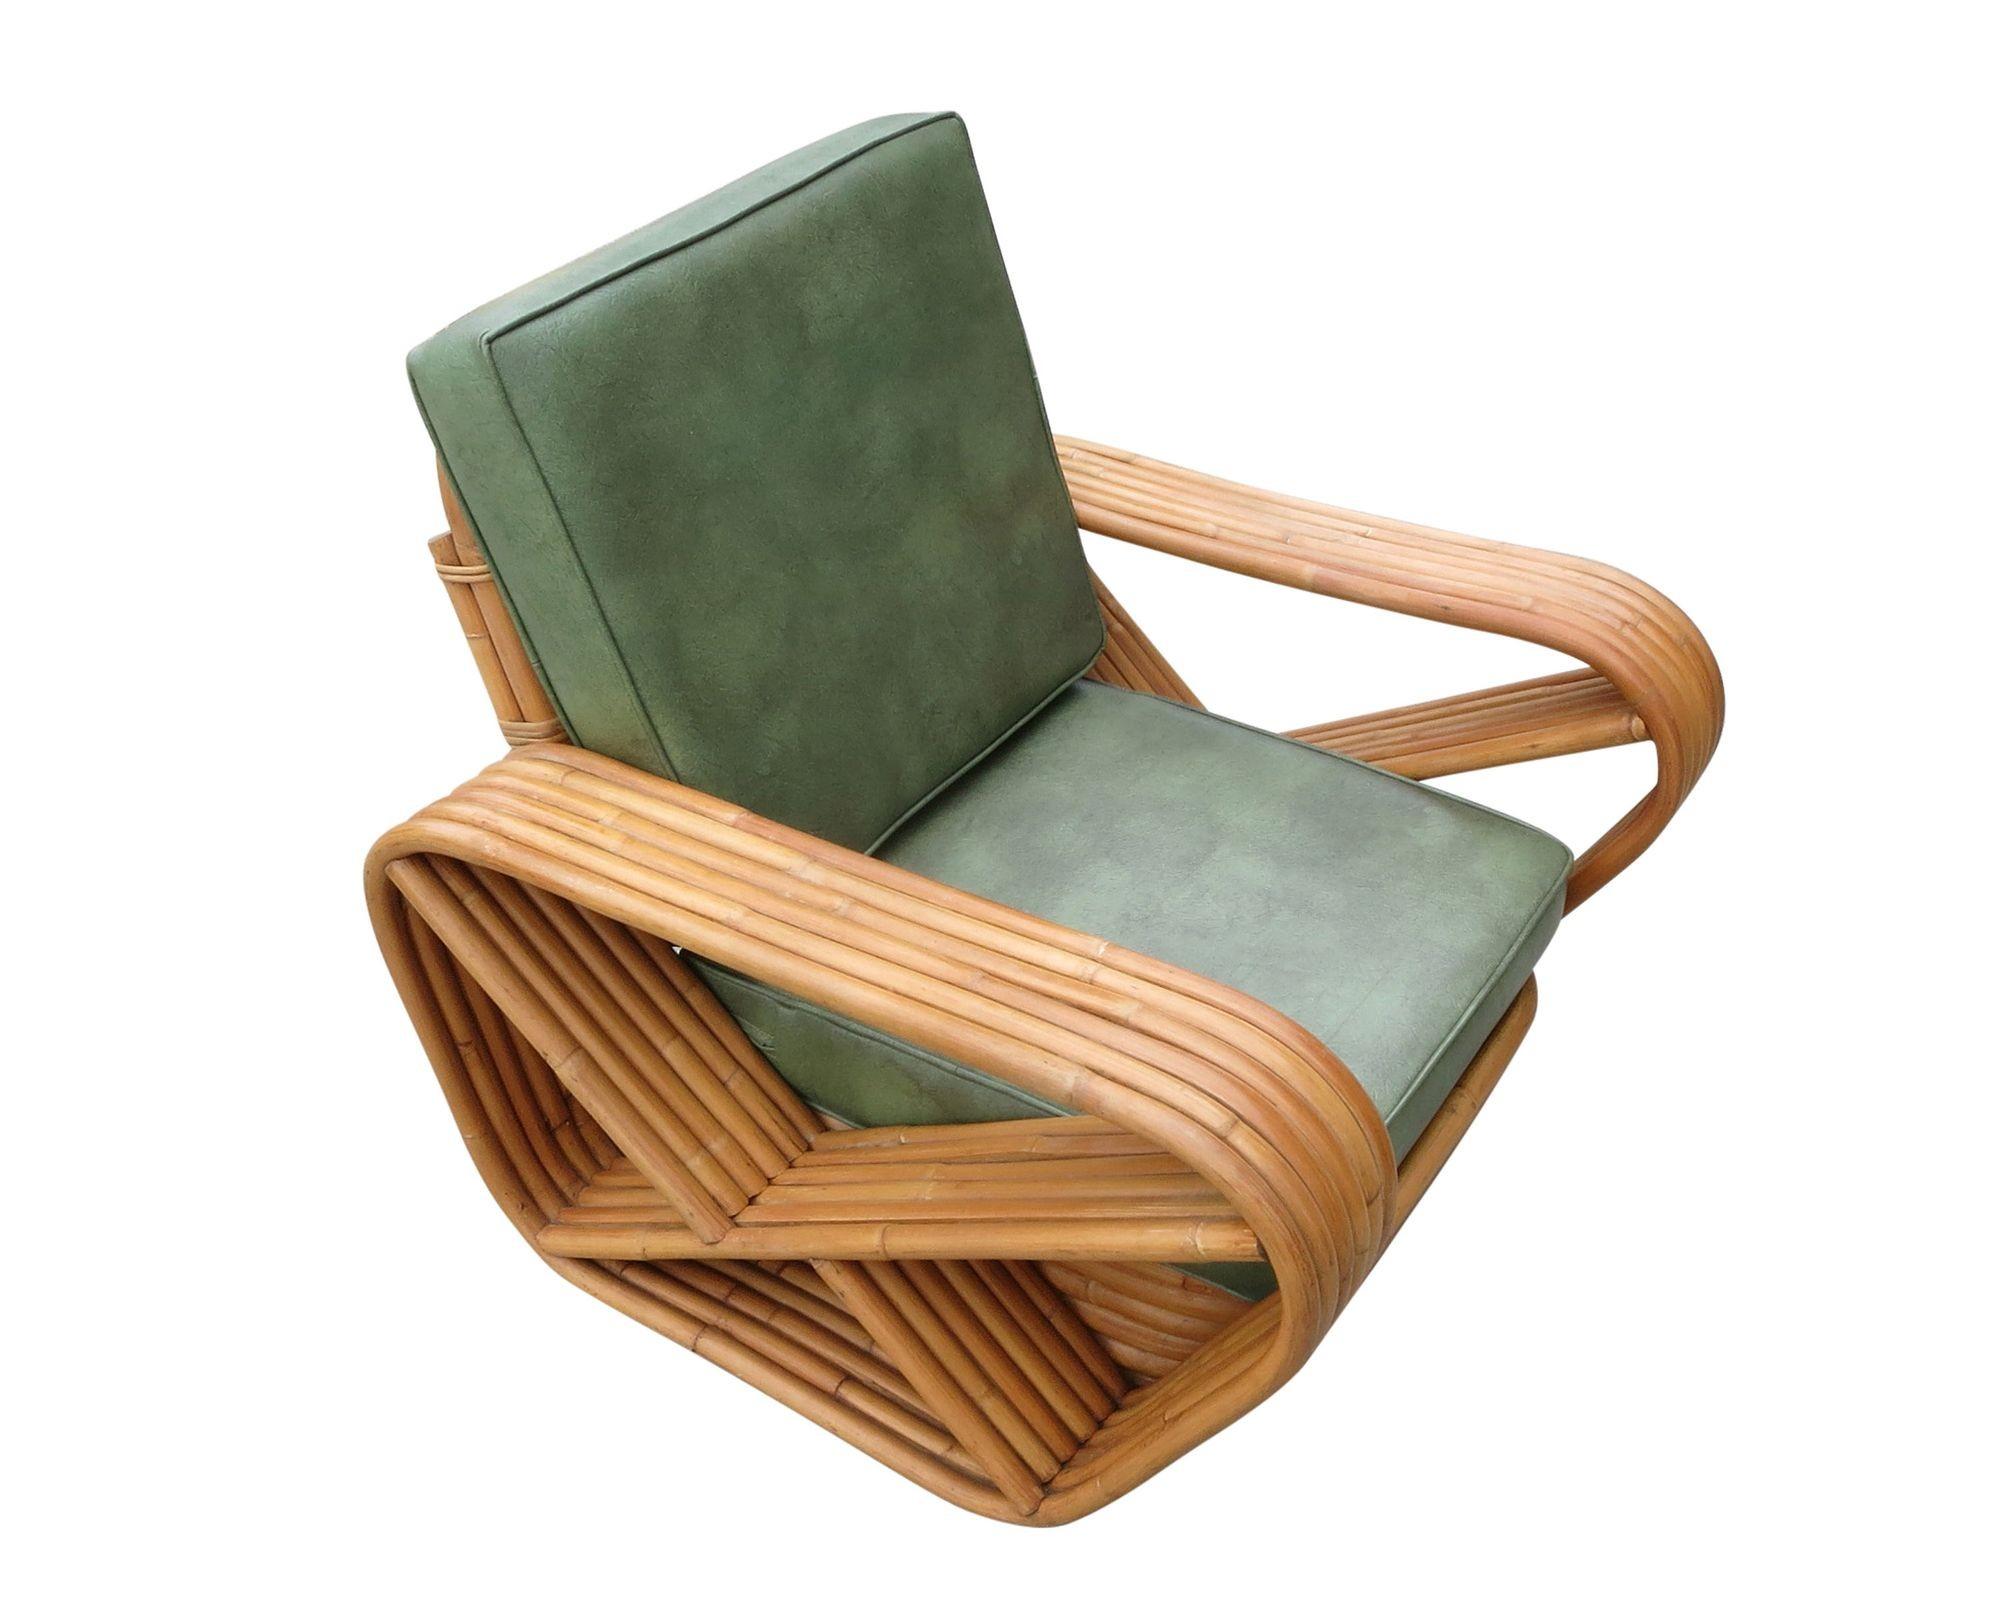 Art Deco six-strand, rattan lounge chair features square pretzel arms and a Classic stacked base. Included is the matching stacked rattan Ottoman.

Custom cushions C.O.M. (Costumers Own Material) are included in the price. Simply supply the fabric